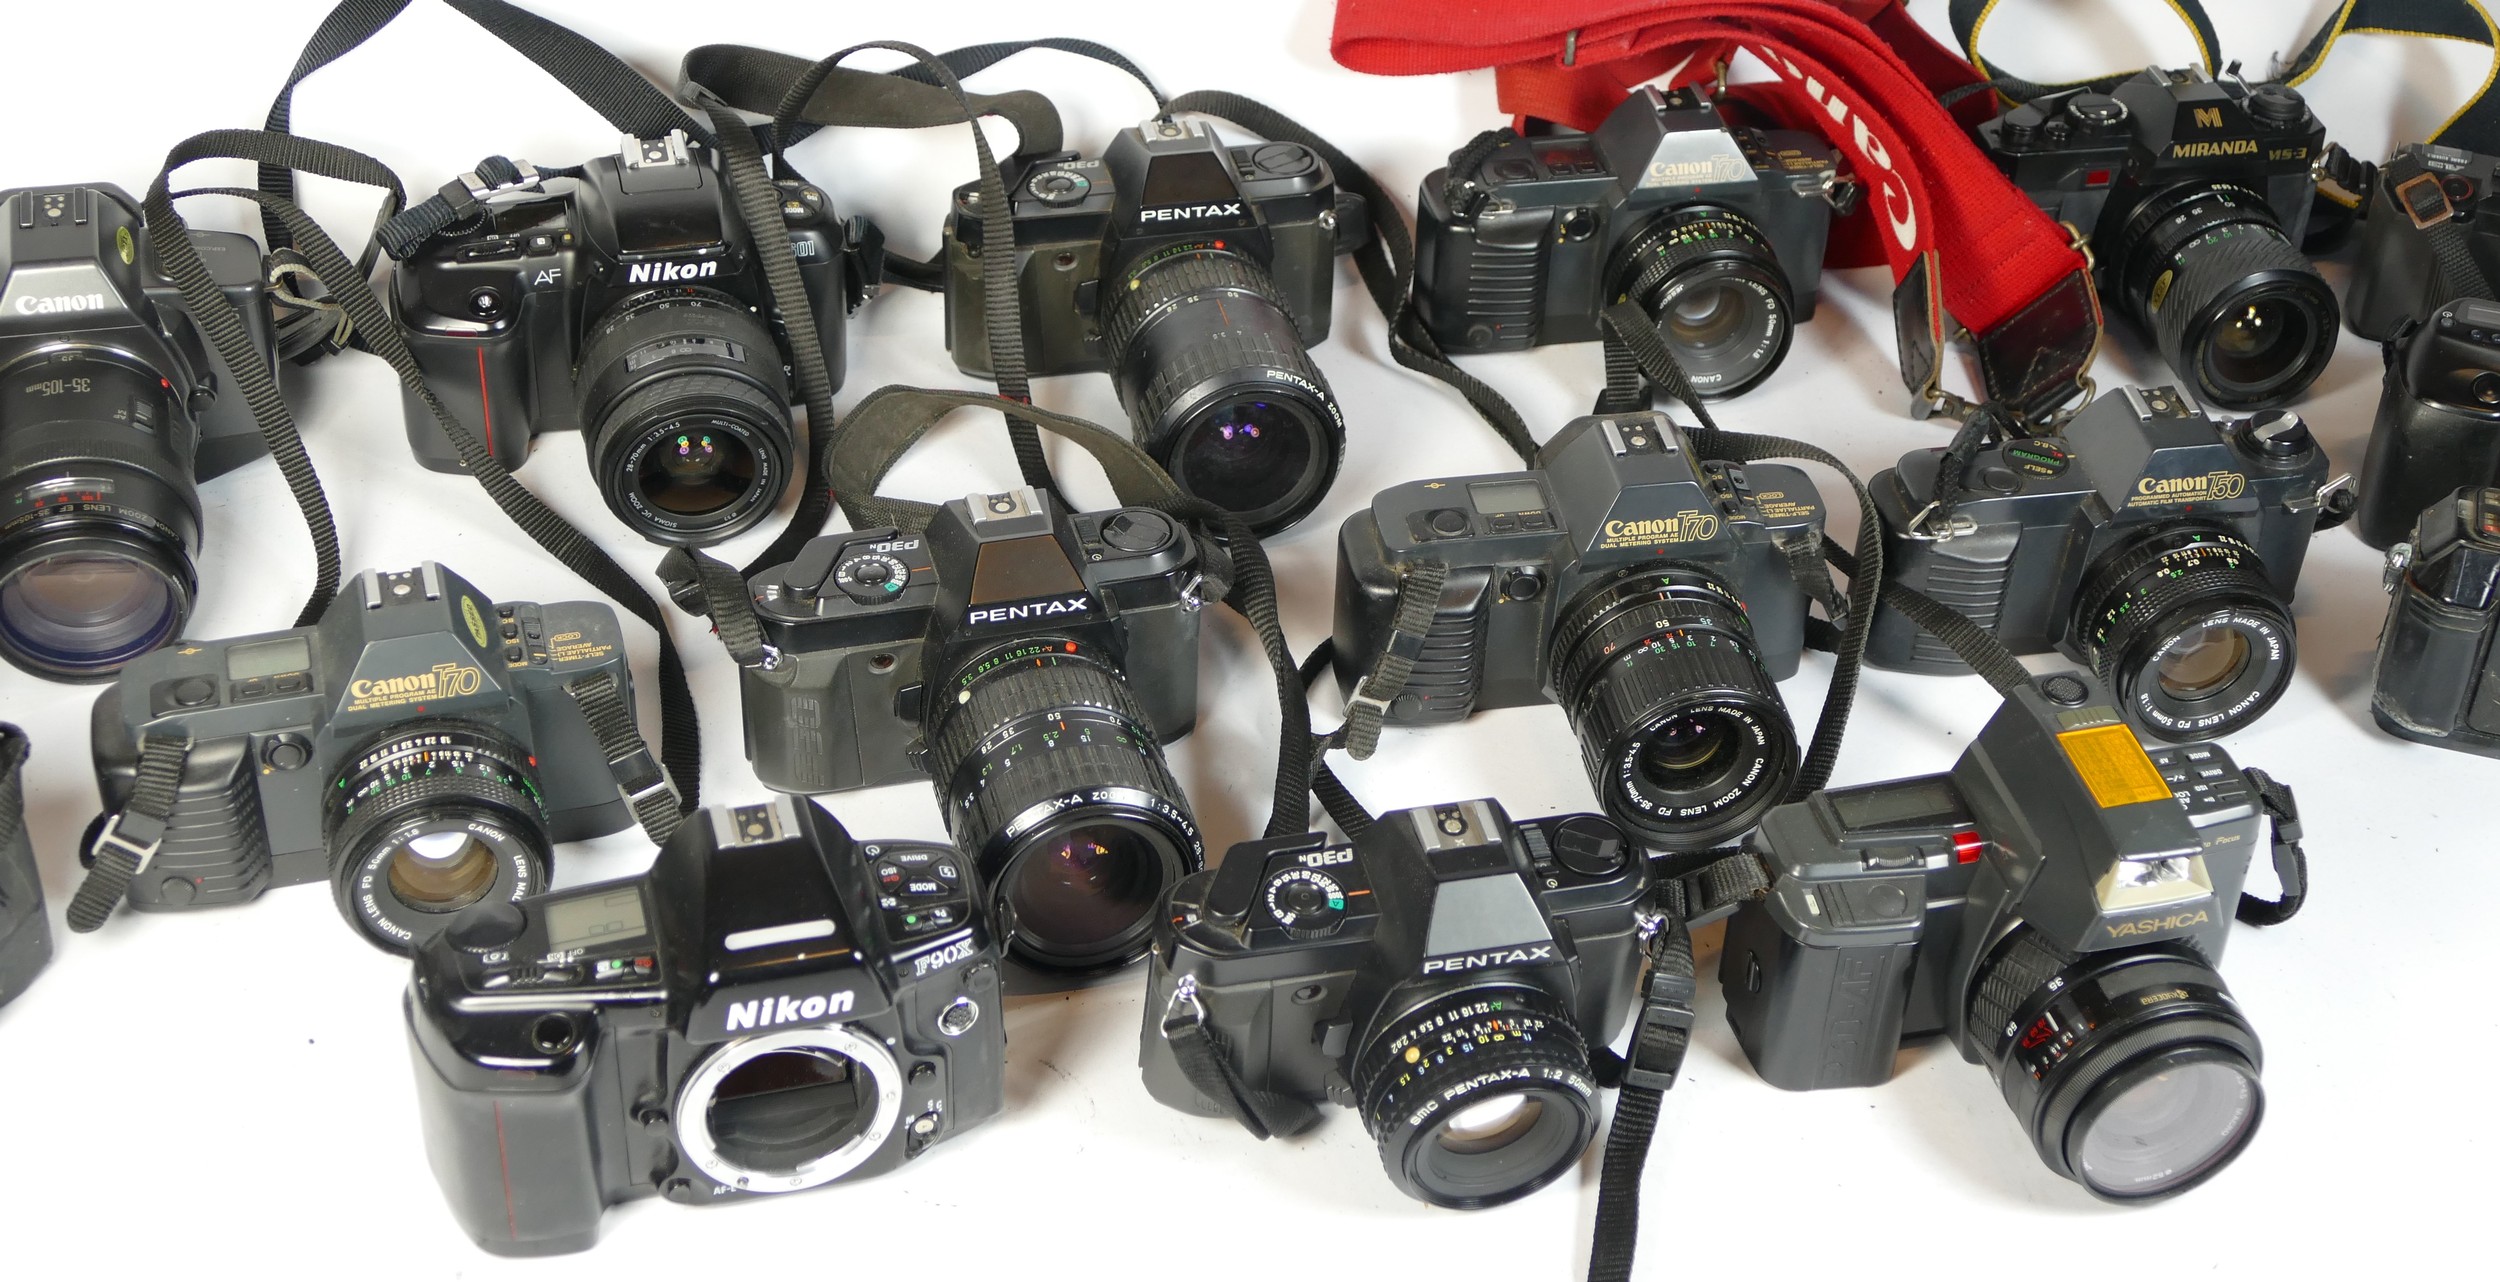 Twenty seven SLR vintage film cameras to include a Pentax P30, a Nikon F301, a Canon T70 and a Nikon - Image 2 of 2